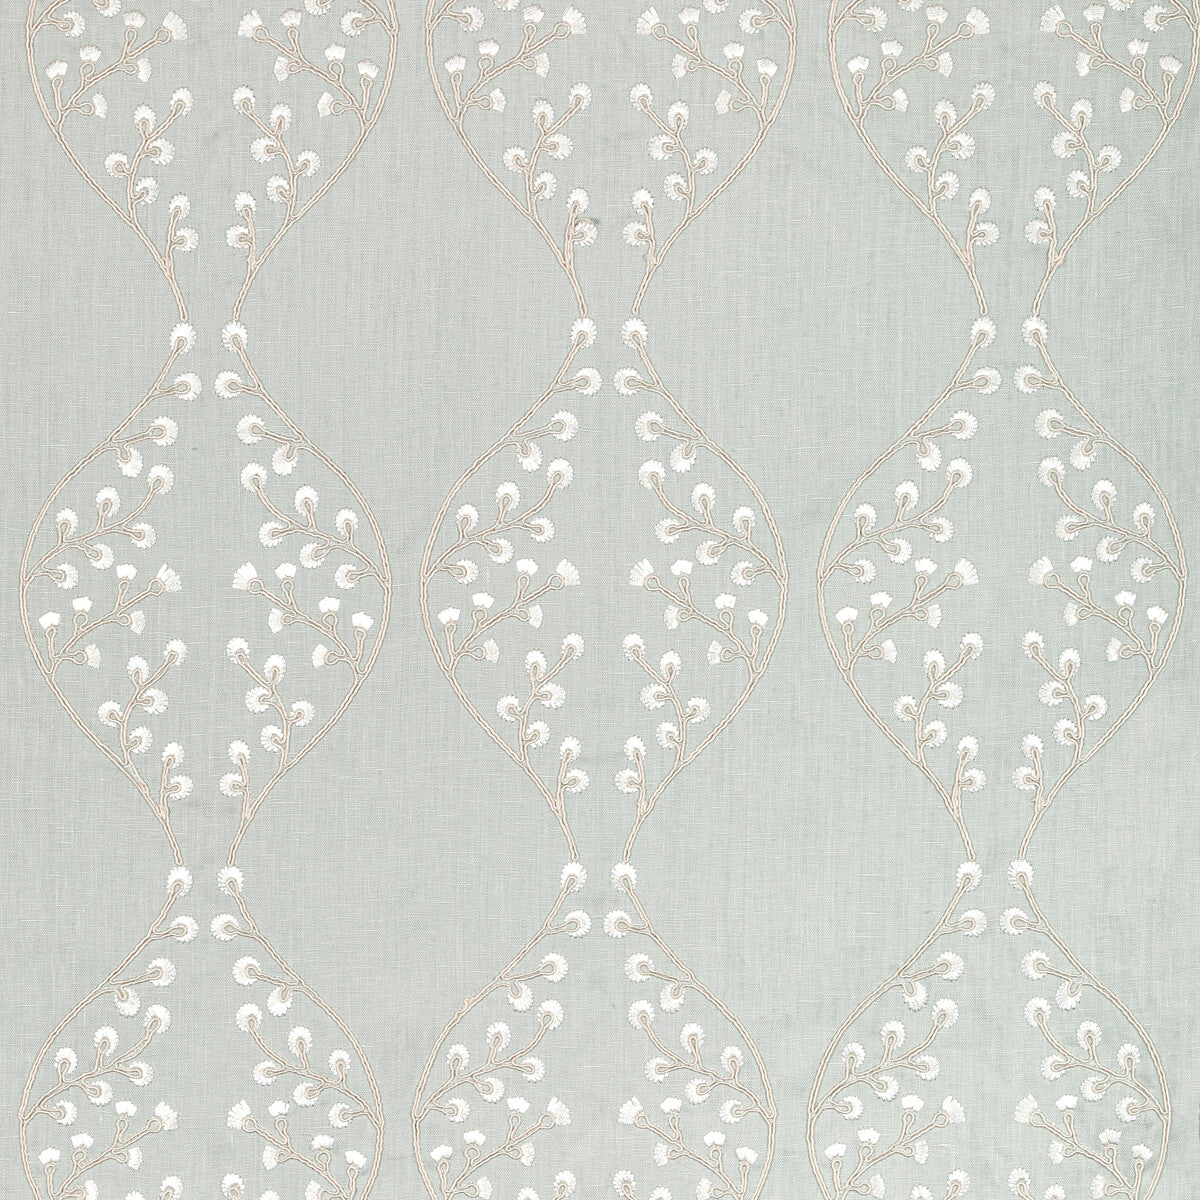 Lillie Embroidery fabric in aqua color - pattern 2021129.13.0 - by Lee Jofa in the Summerland collection